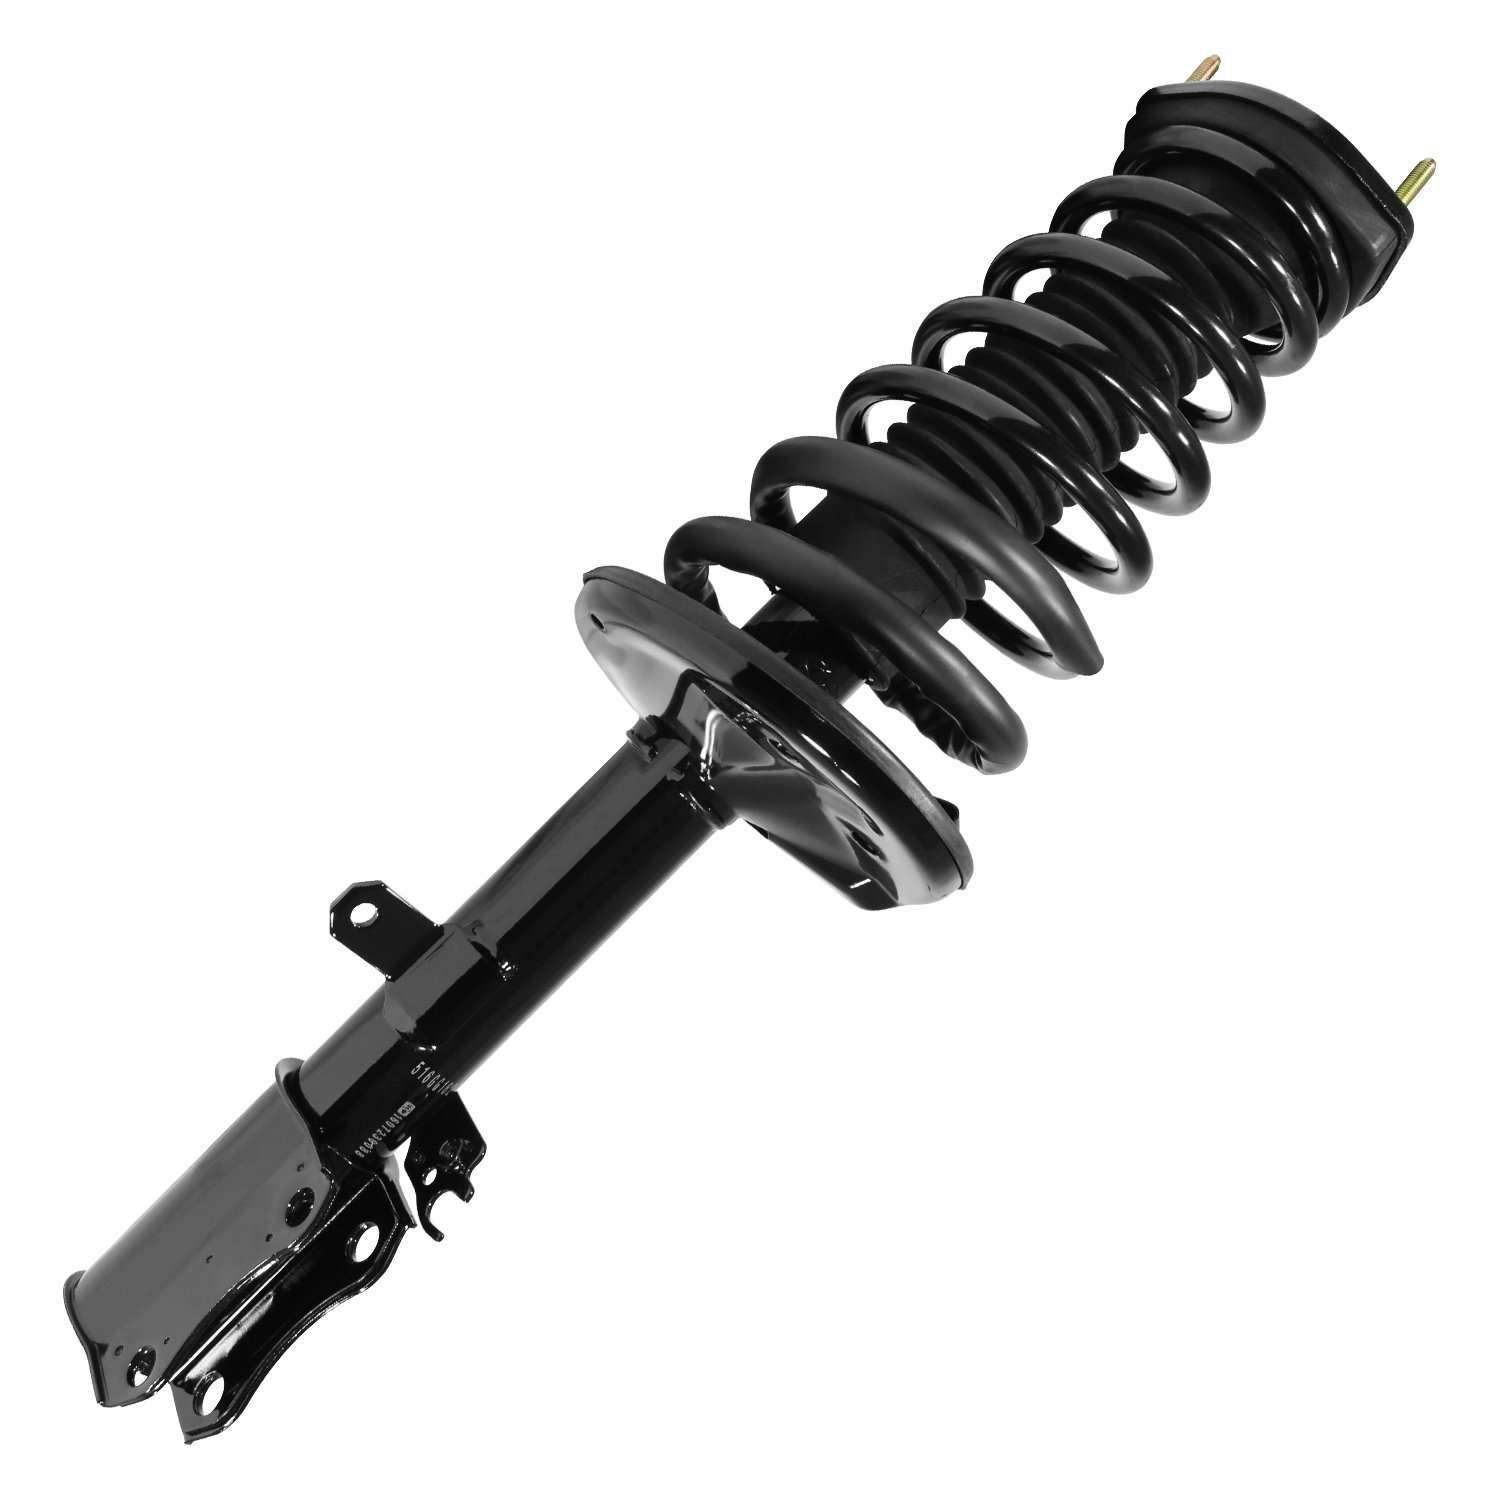 15162 Suspension Strut & Coil Spring Assembly Fits Select Lexus ES300, Toyota Avalon, Toyota Camry, Toyota Solara